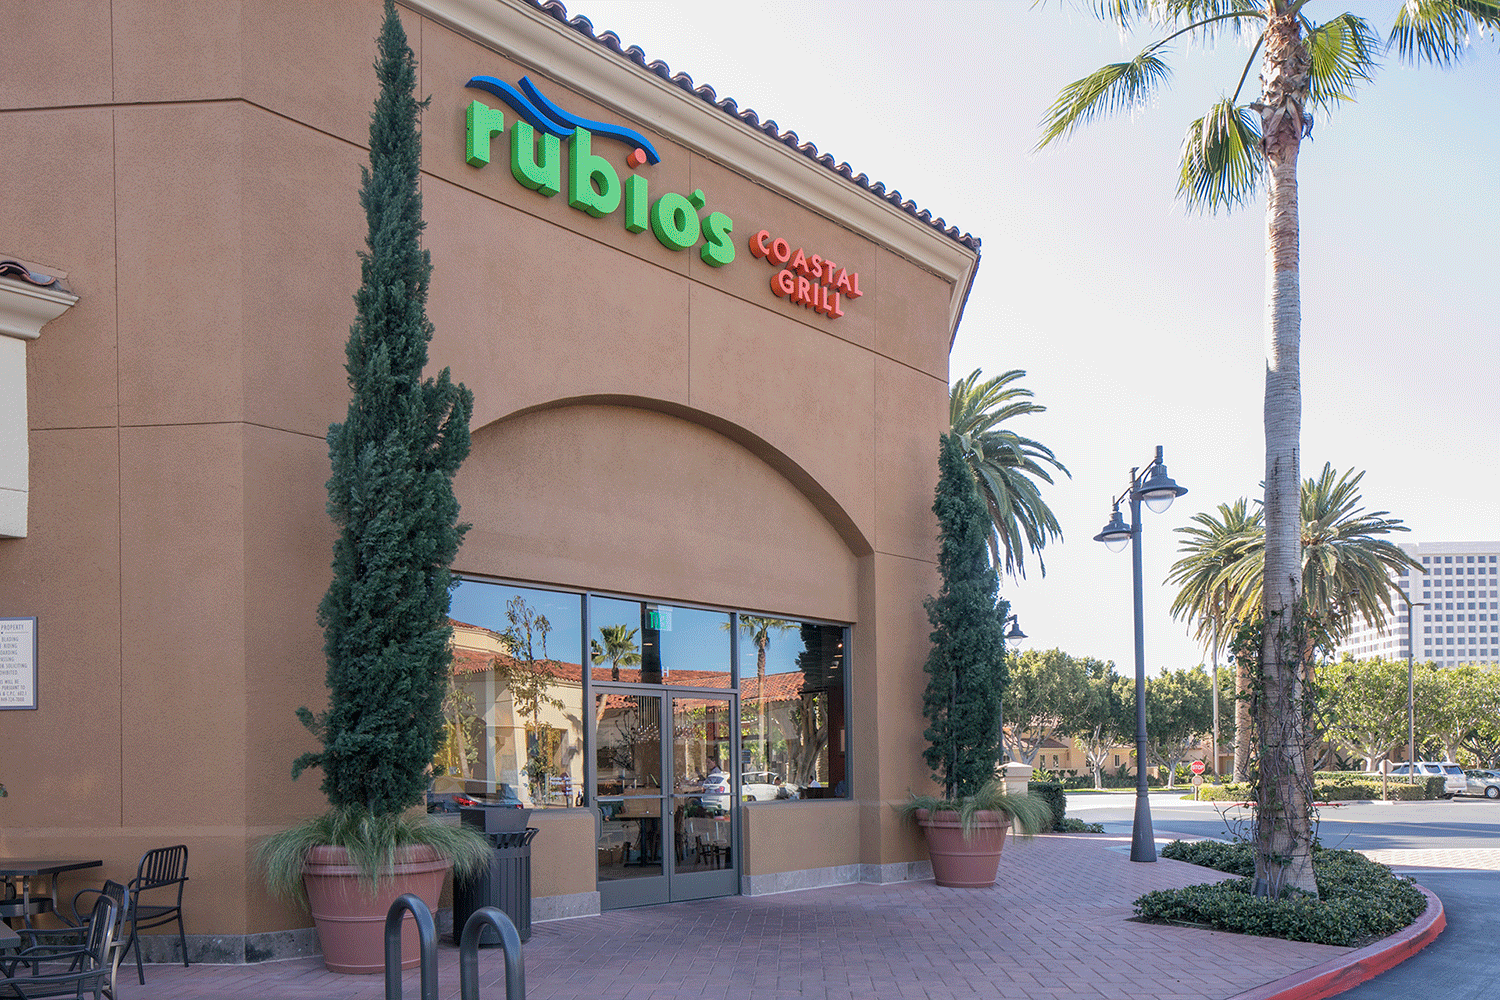  View of Rubio's Coastal Grill at Harvard Place Shopping Center